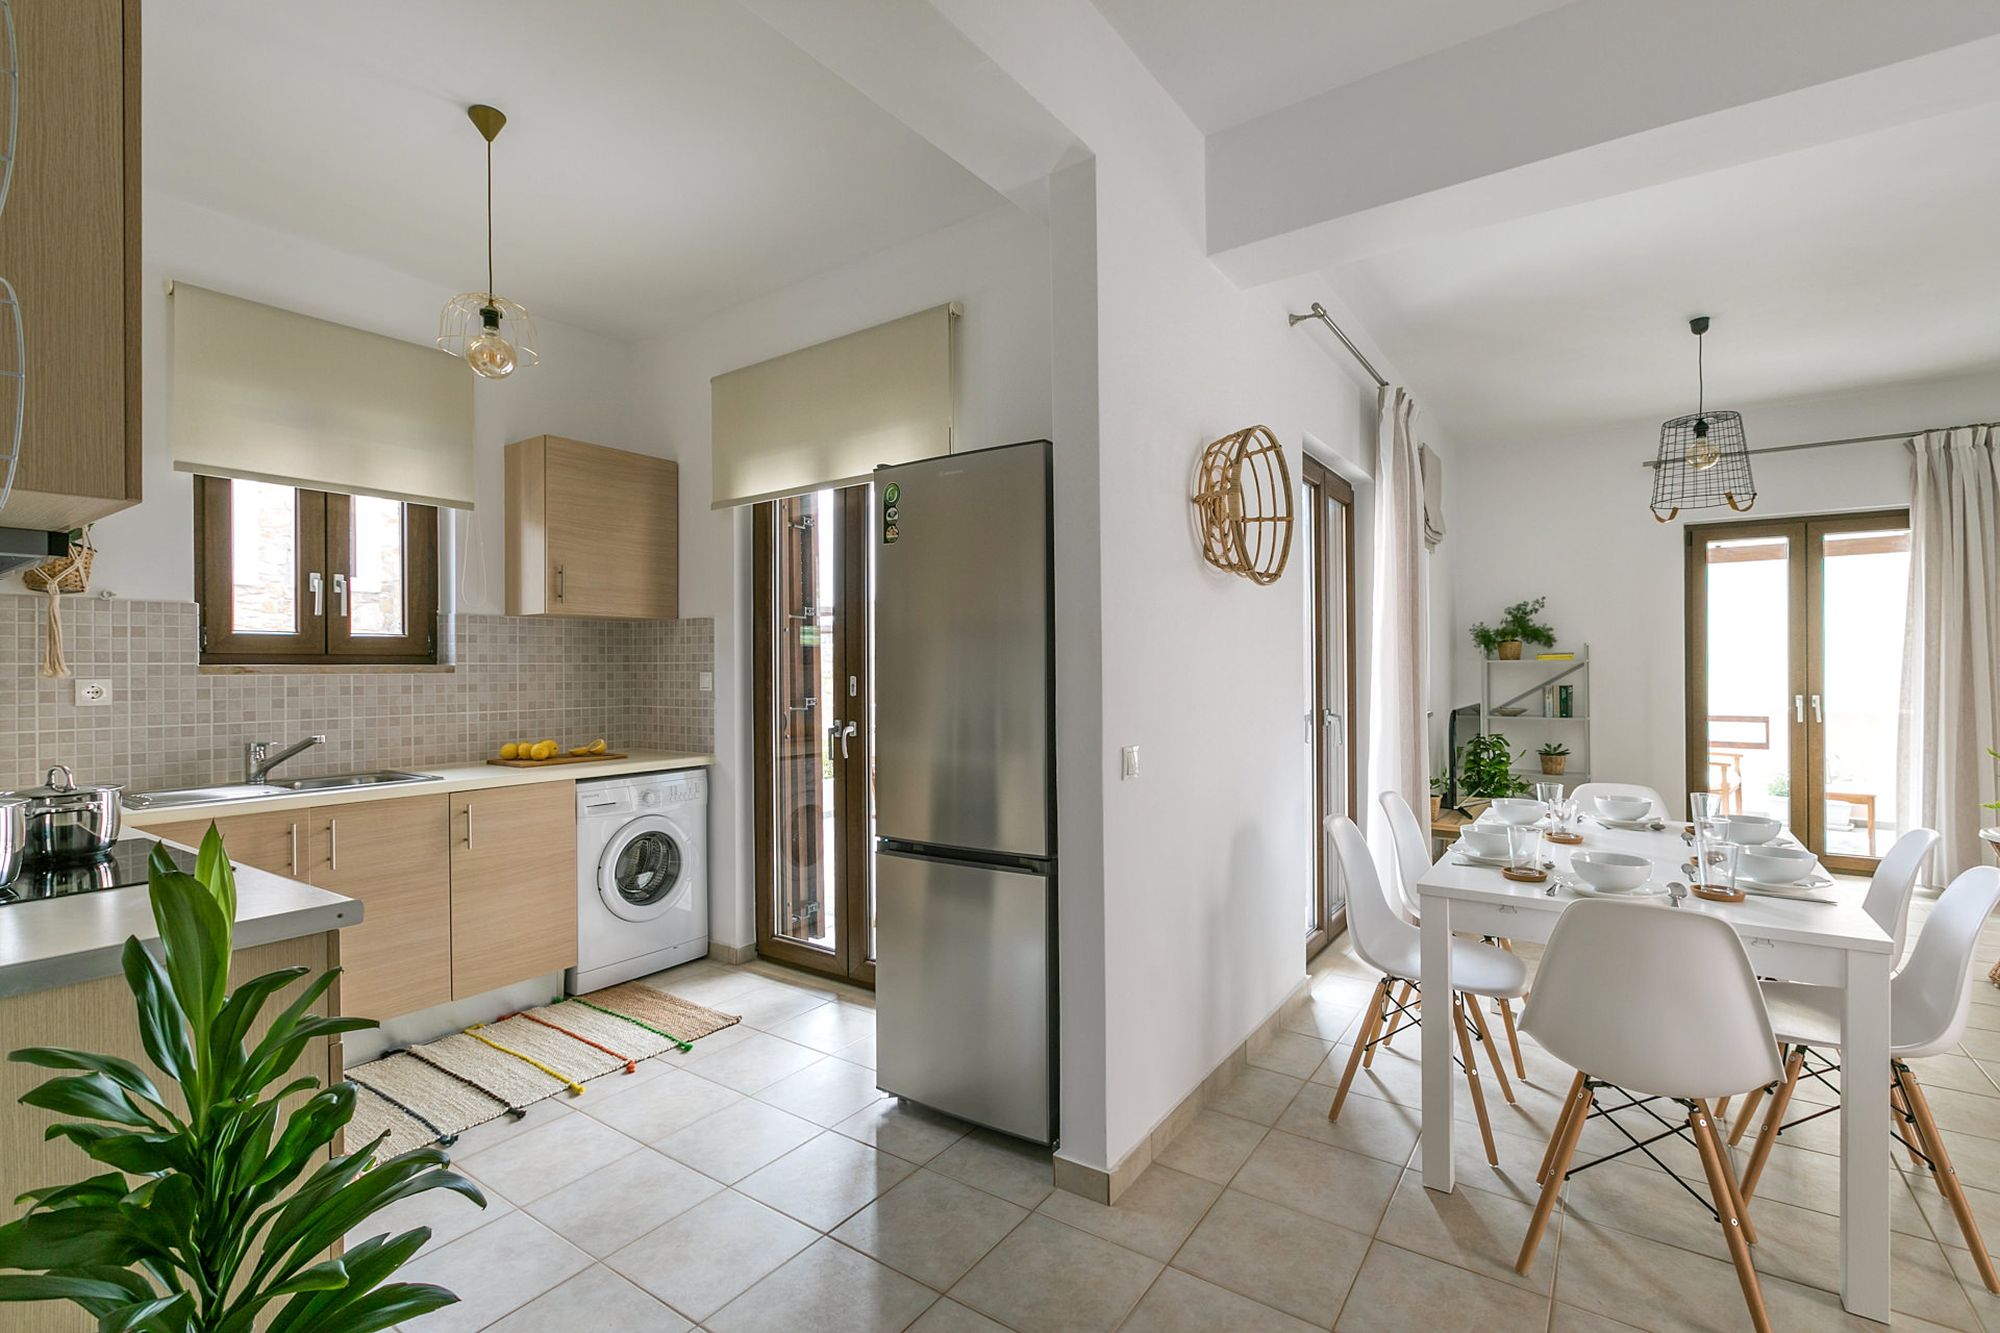 Modern kitchen equipped with a big inox fridge, a washing machine and a white dining table with six chairs.